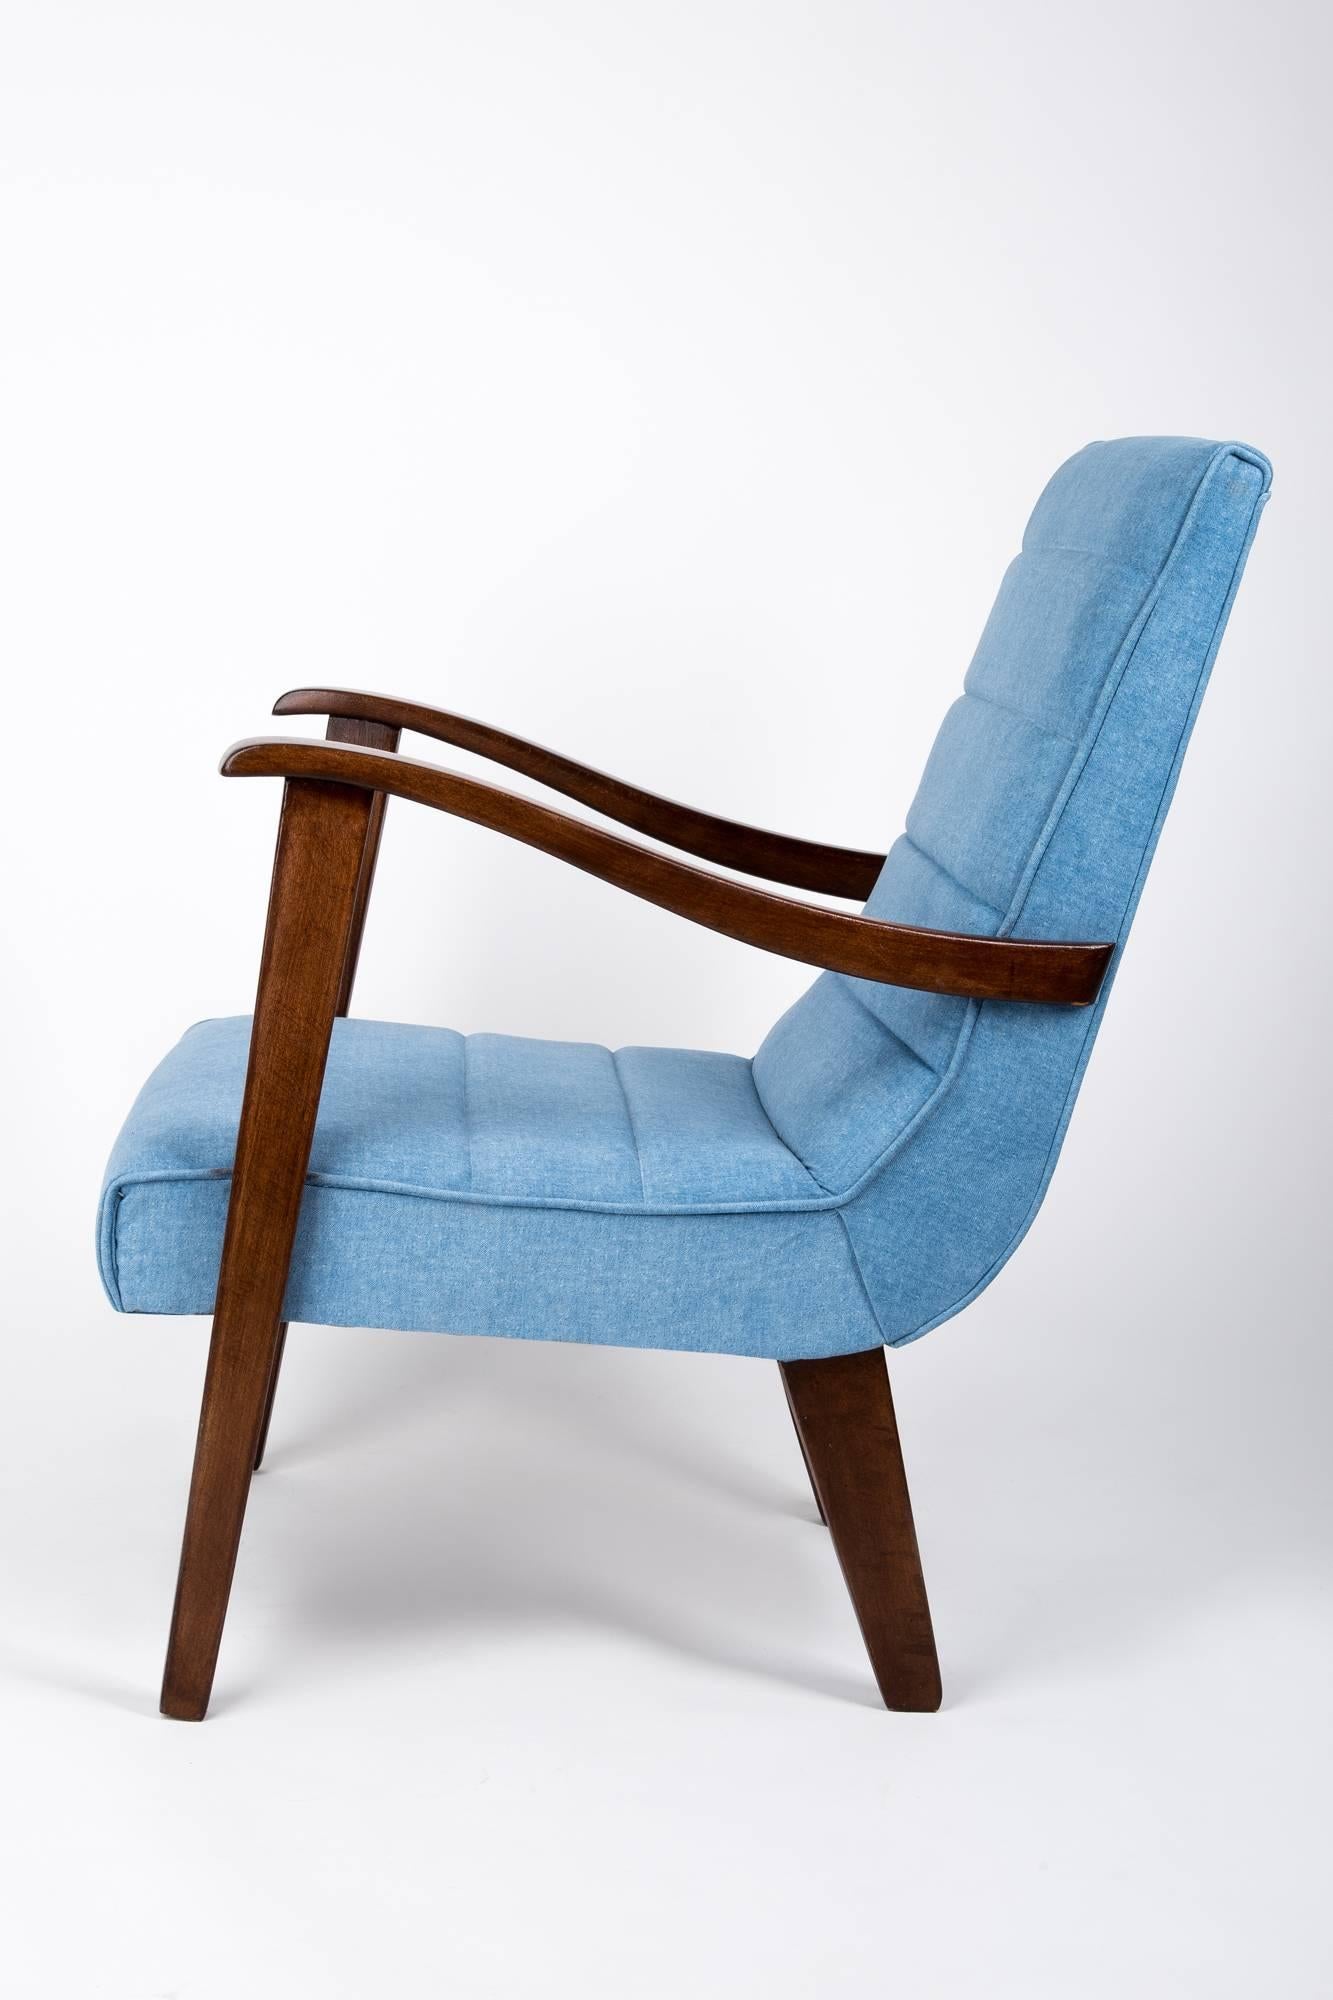 Polish Mid-Century Modern Blue Armchair by Prudnik Furniture Factory, 1960s, Poland For Sale